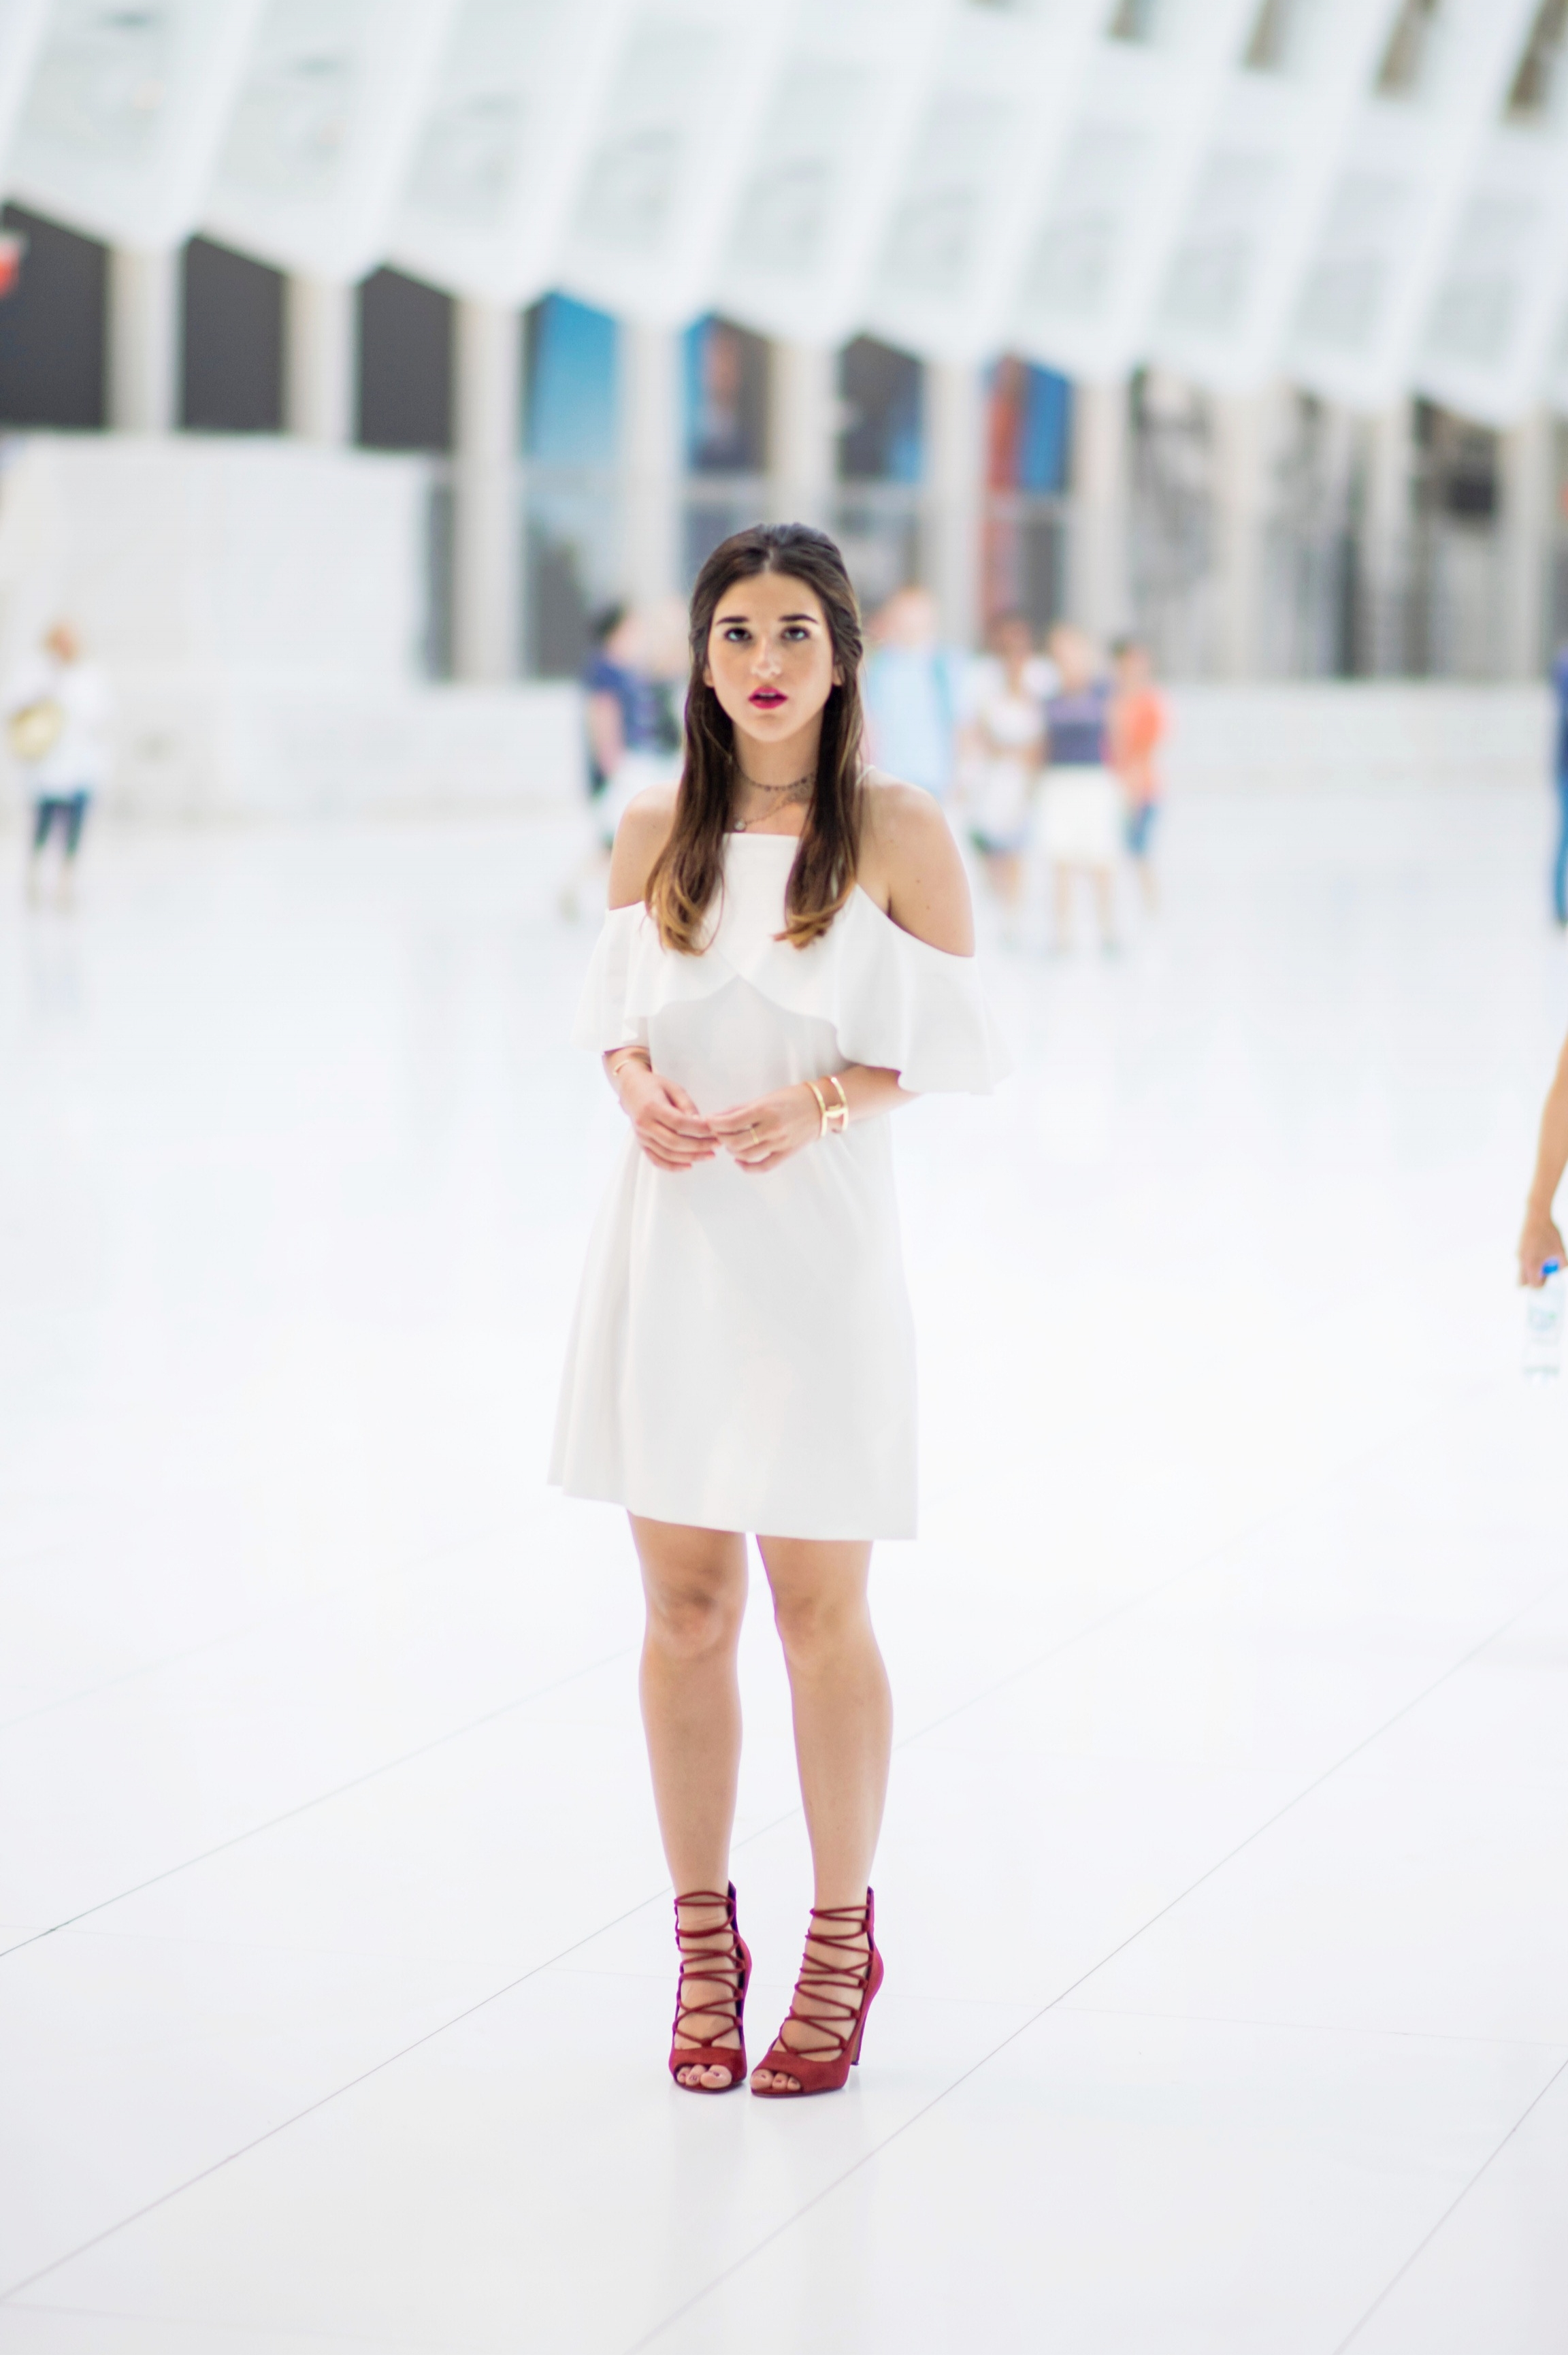 Cold Shoulder White Dress Red Heels Louboutins & Love Fashion Blog Esther Santer NYC Street Style Blogger Outfit OOTD Trendy French Connection Zara Beaded Chokers Jewelry Bloomingdale's Girl Women Shoes Hair Pretty Inspo Gold Bracelet Color Photoshoot.jpg